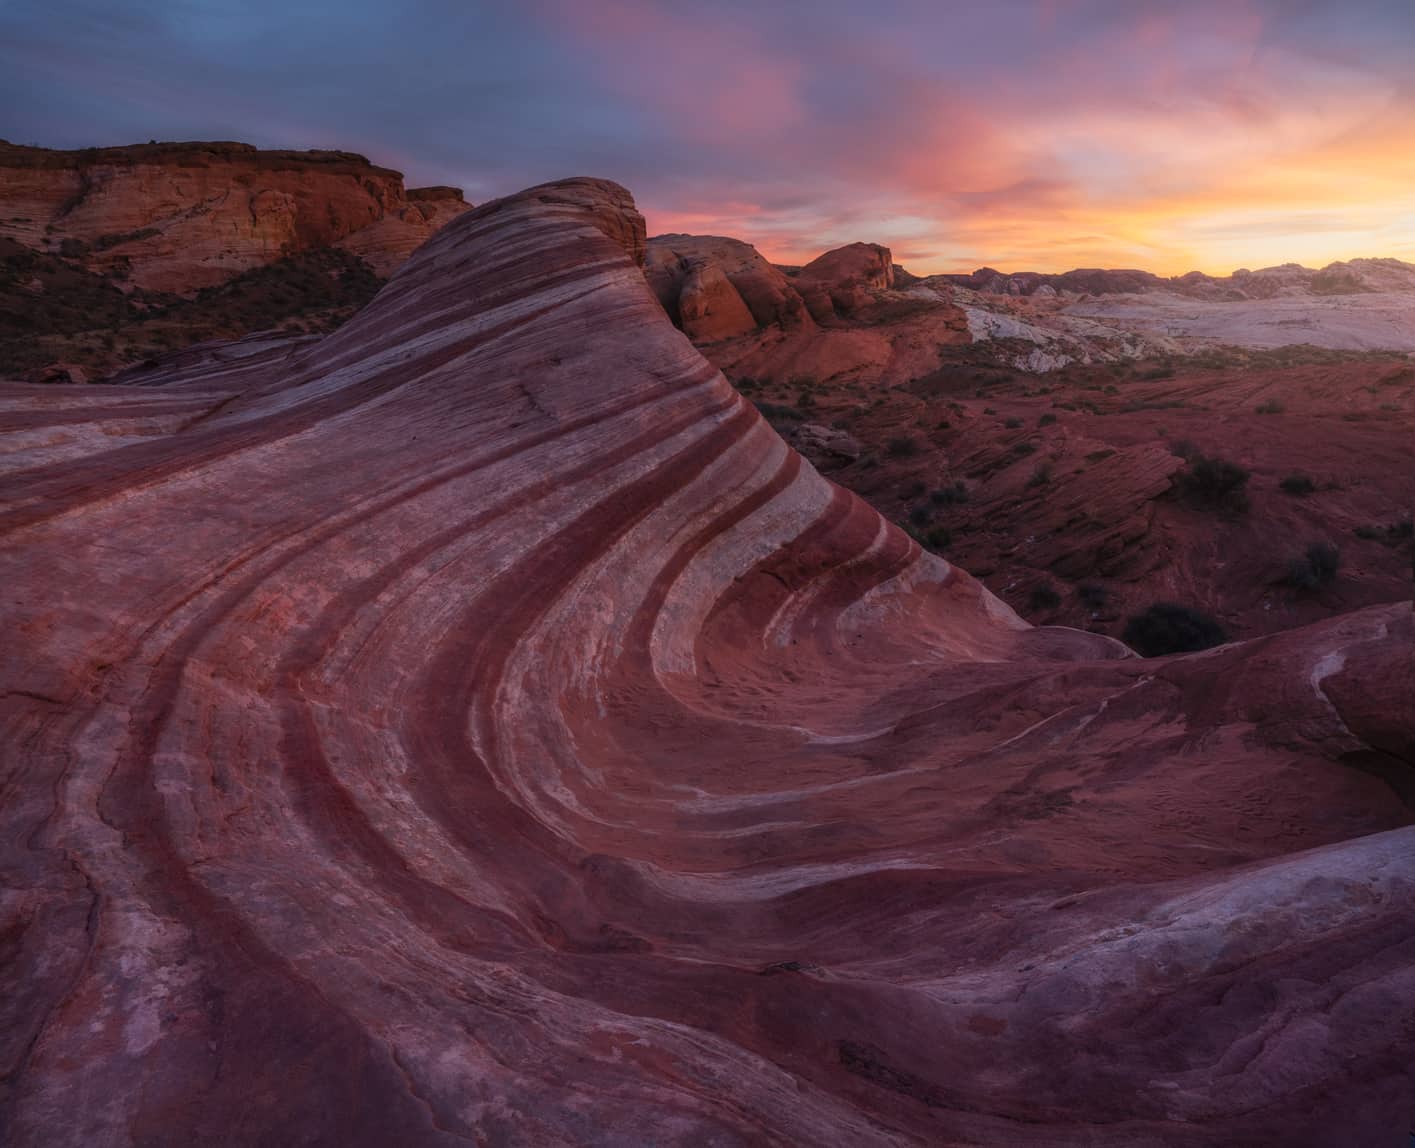 Fire Wave Las Vegas hiking trails in Valley of Fire State Park, one of the top things to see in Nevada